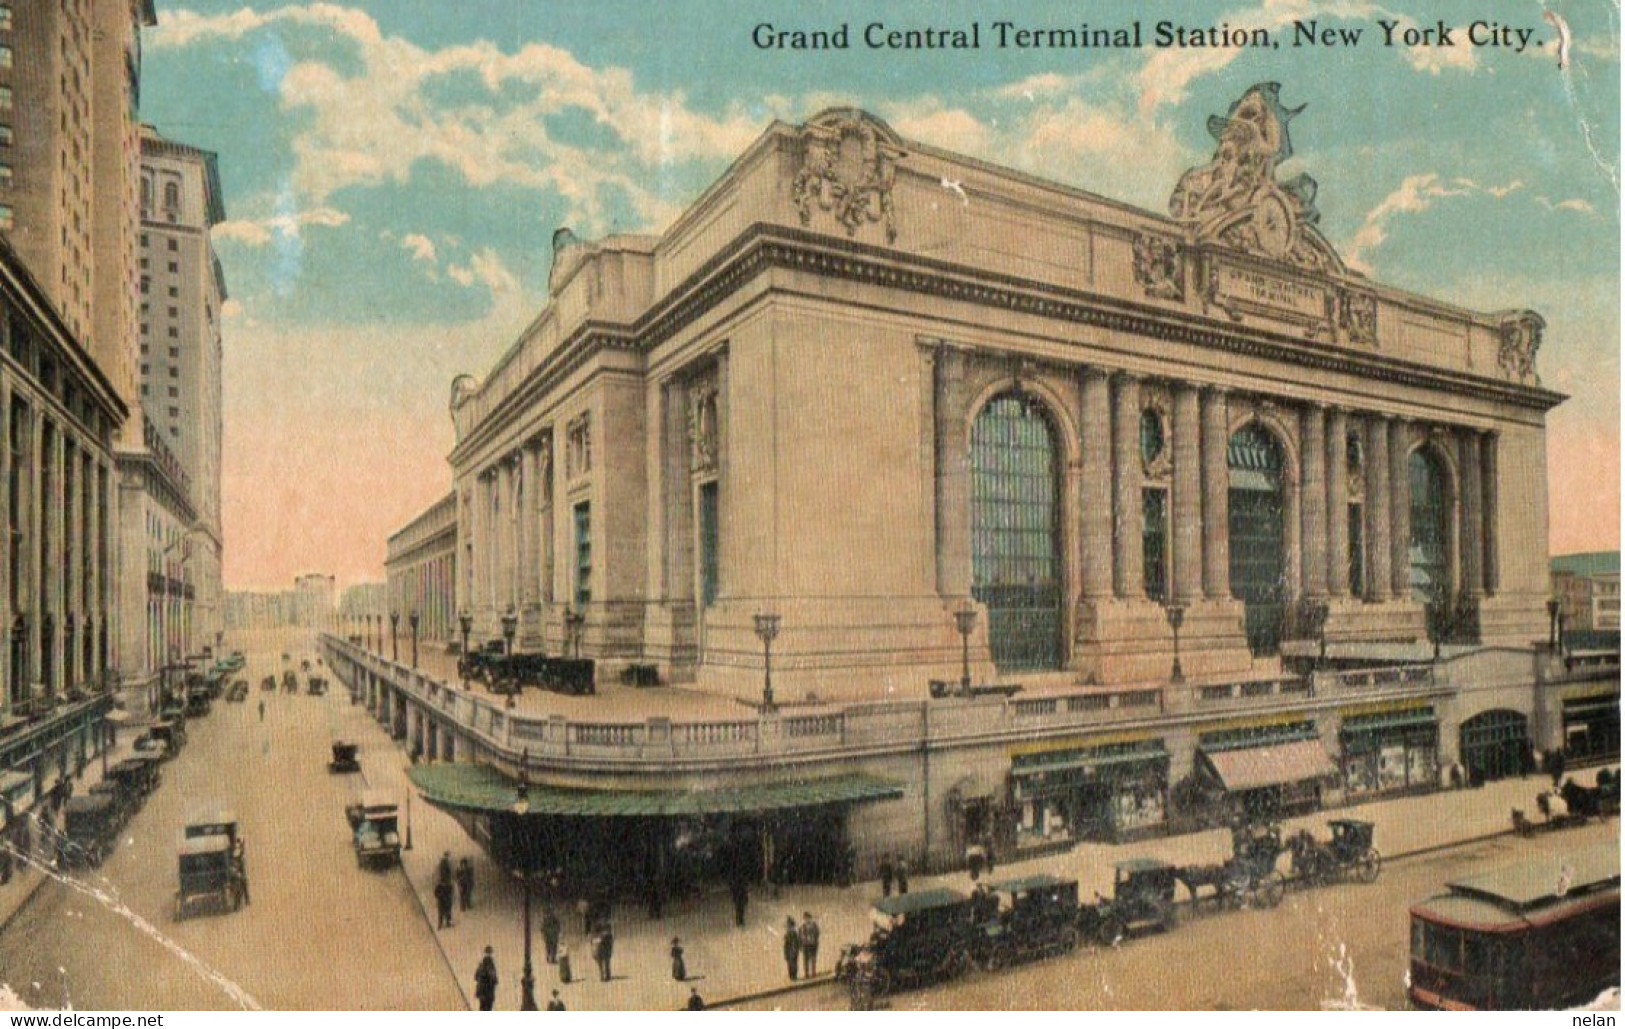 GRAND CENTRAL TERMINAL STATION - NEW YORK CITY - Grand Central Terminal